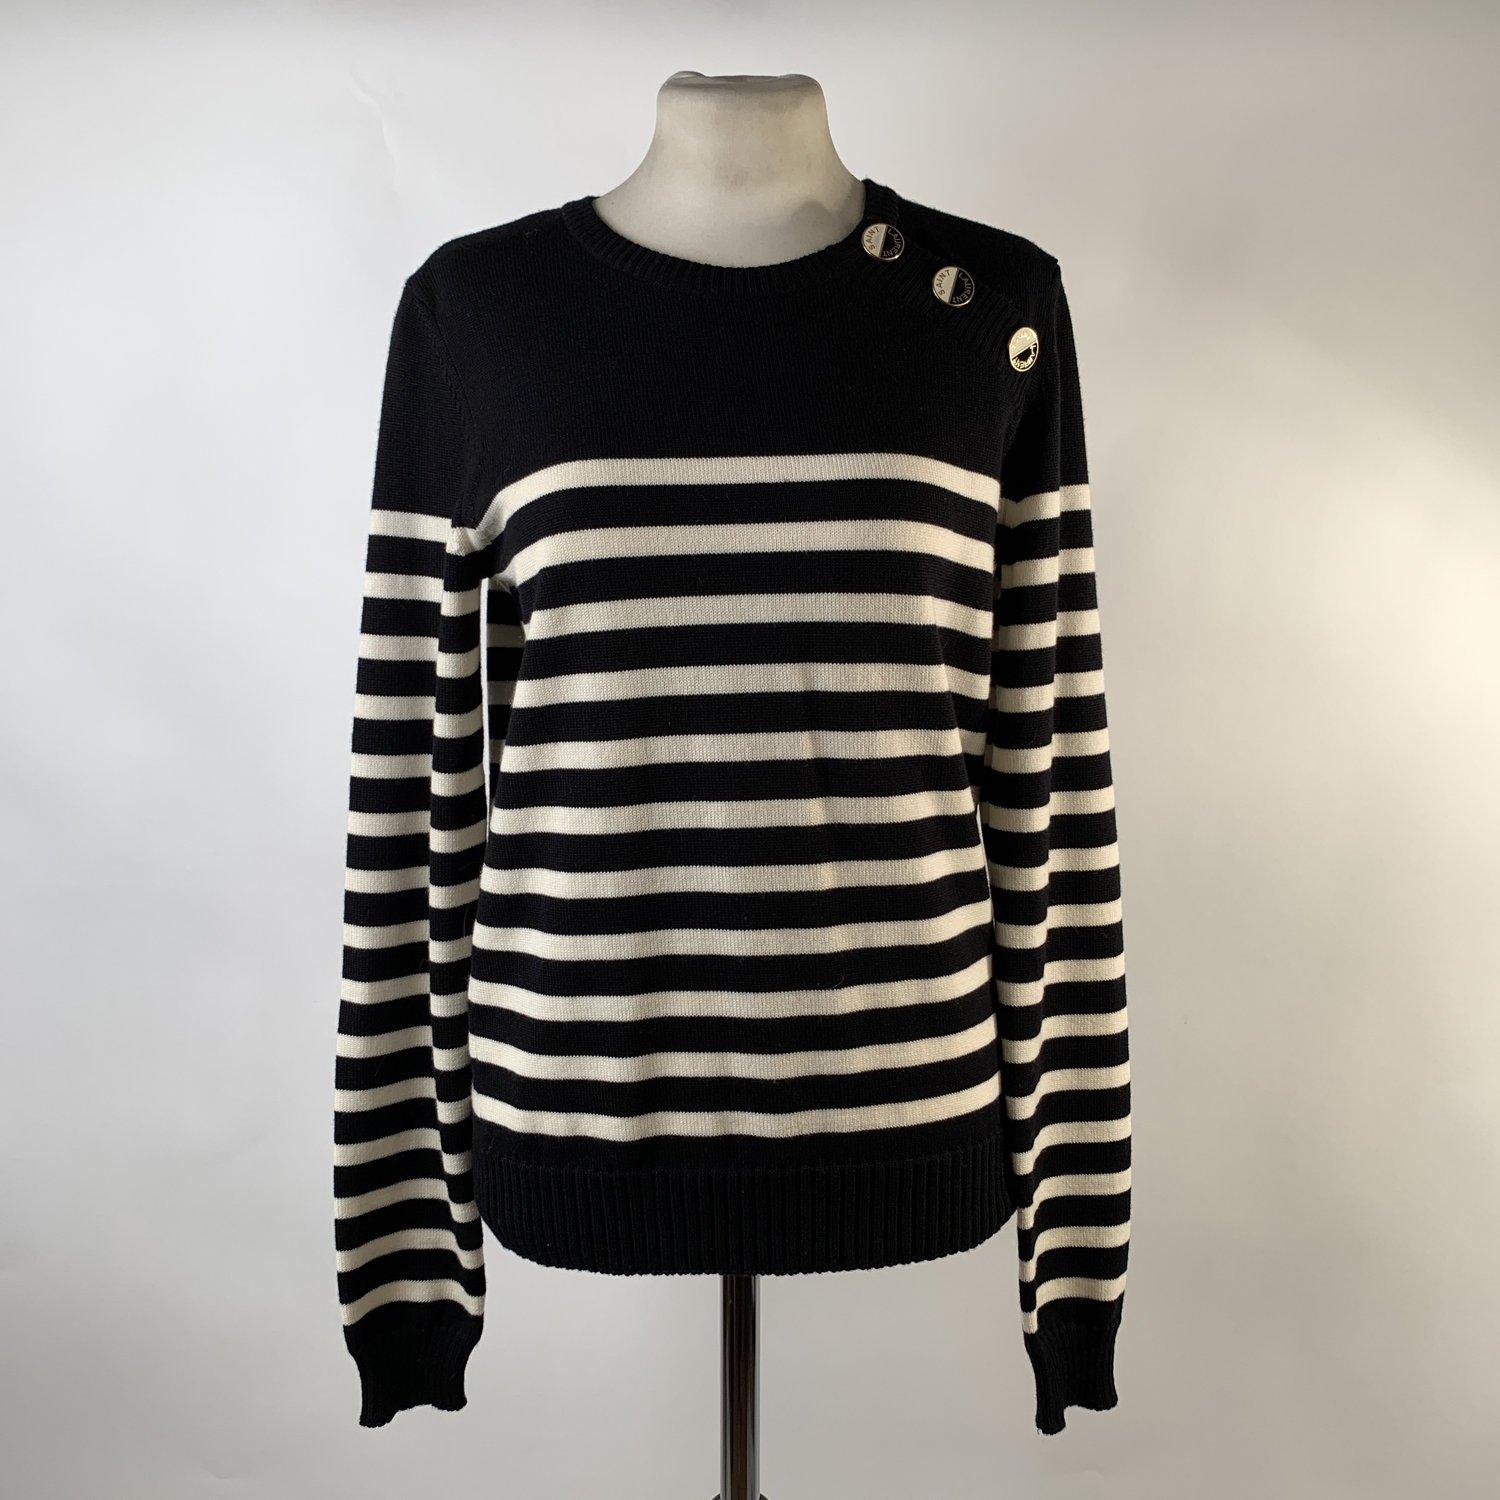 MATERIAL: Wool COLOR: Black, White MODEL: Jumper GENDER: Women SIZE: Small COUNTRY OF MANUFACTURE: Italy Condition CONDITION DETAILS: A :EXCELLENT CONDITION - Used once or twice. Looks mint. Imperceptible signs of wear may be present due to storage